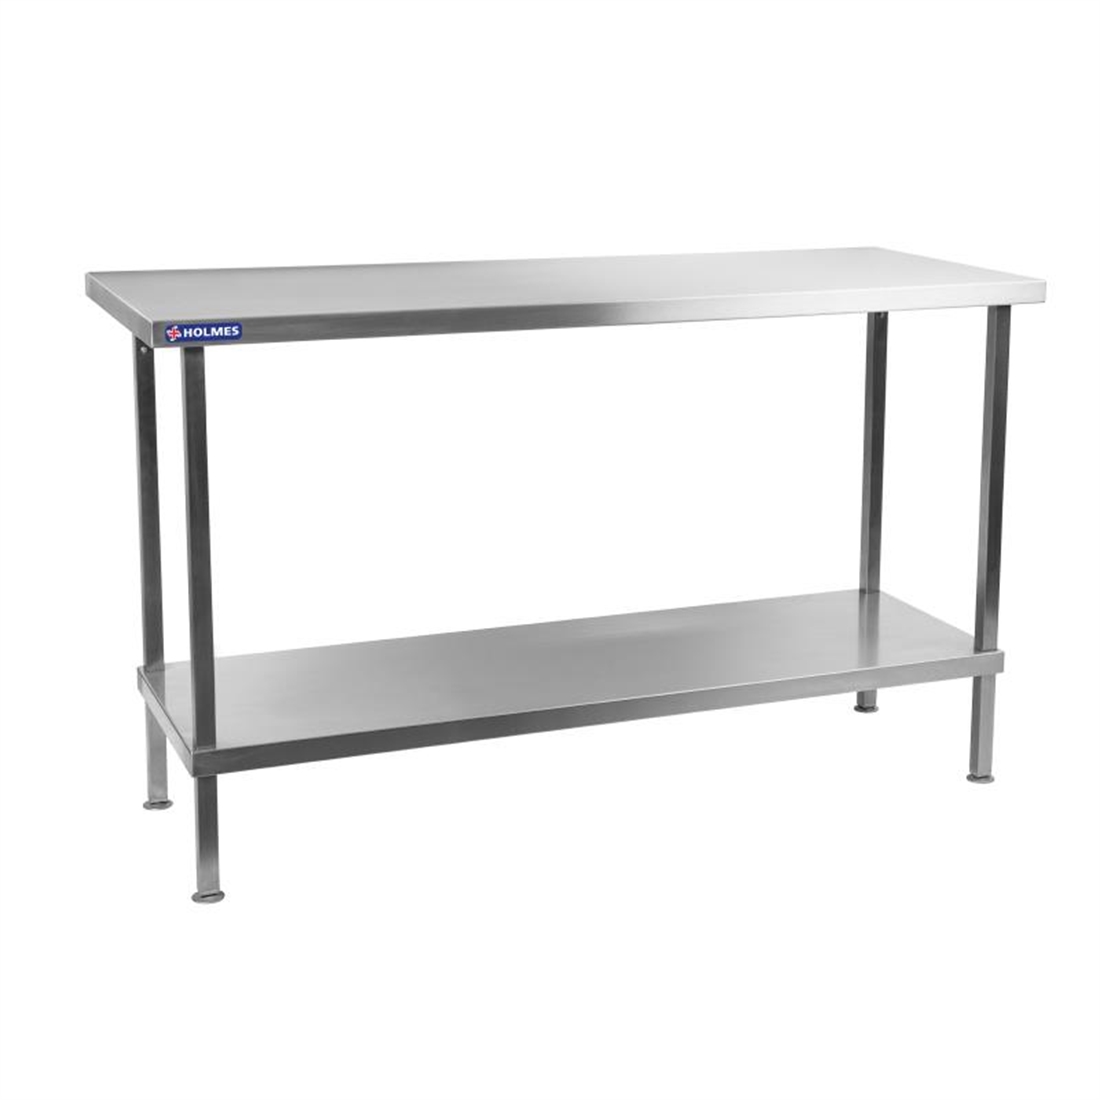 Holmes Stainless Steel Centre Table 900mm